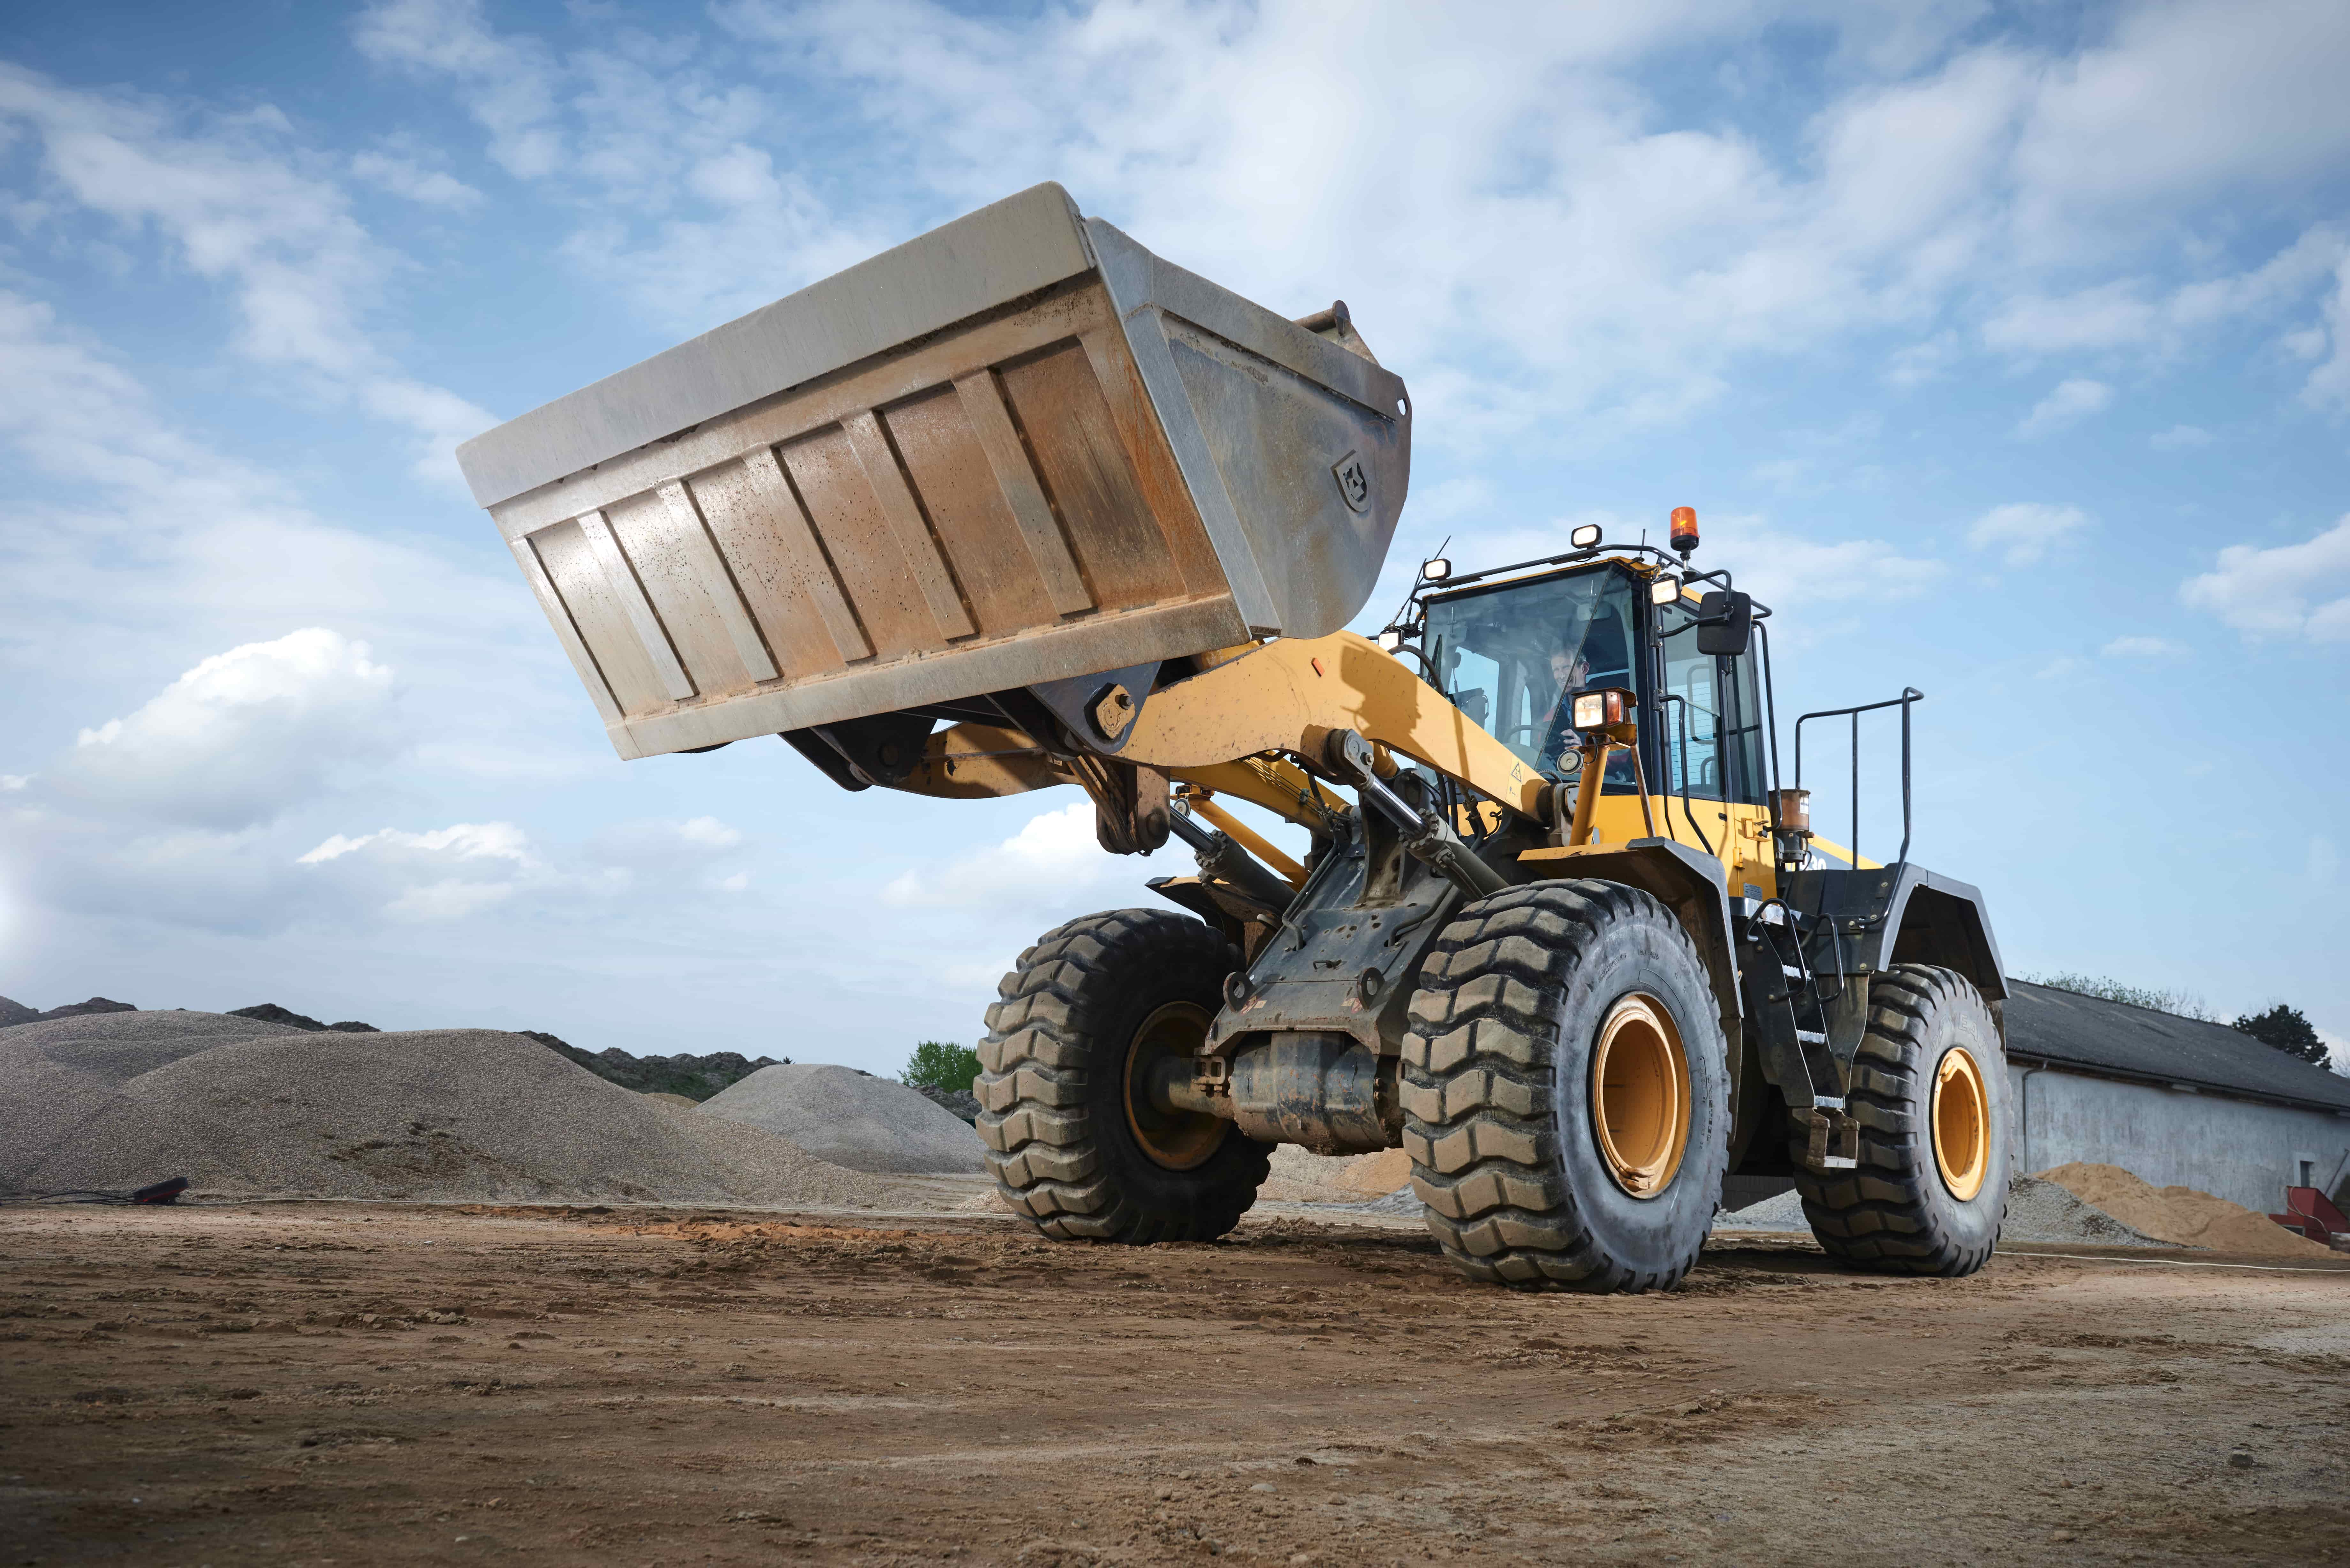 A yellow construction tractor was fitted with R4 industrial tires for their ability to carry heavy loads.